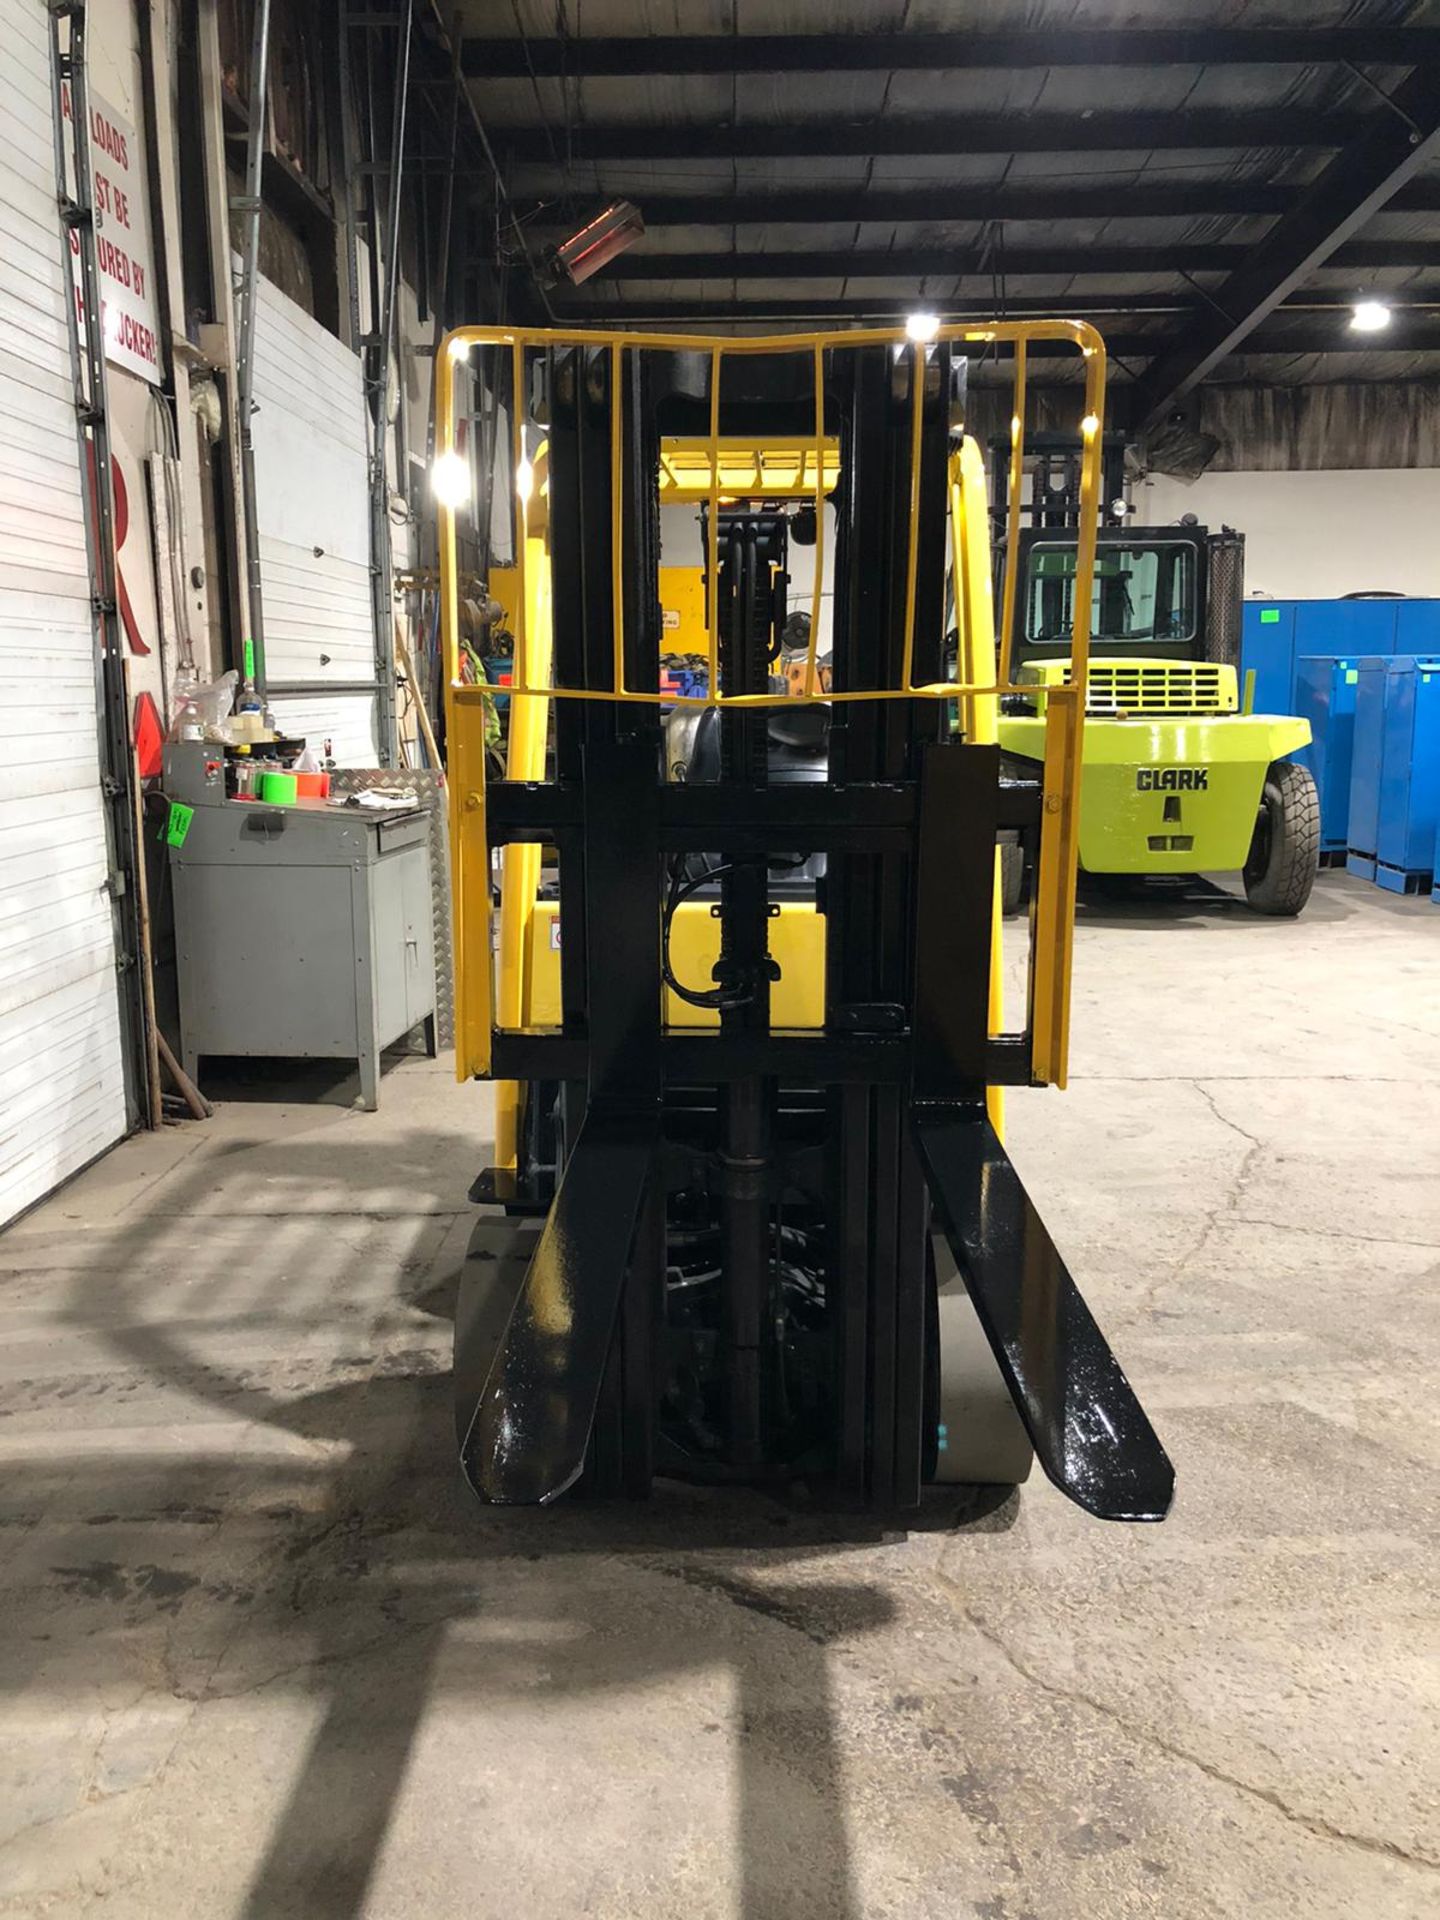 NICE 2018 Hyster model 60 - 6,000lbs Capacity LPG (propane) Forklift with Sideshift - 3-stage mast - - Image 5 of 6